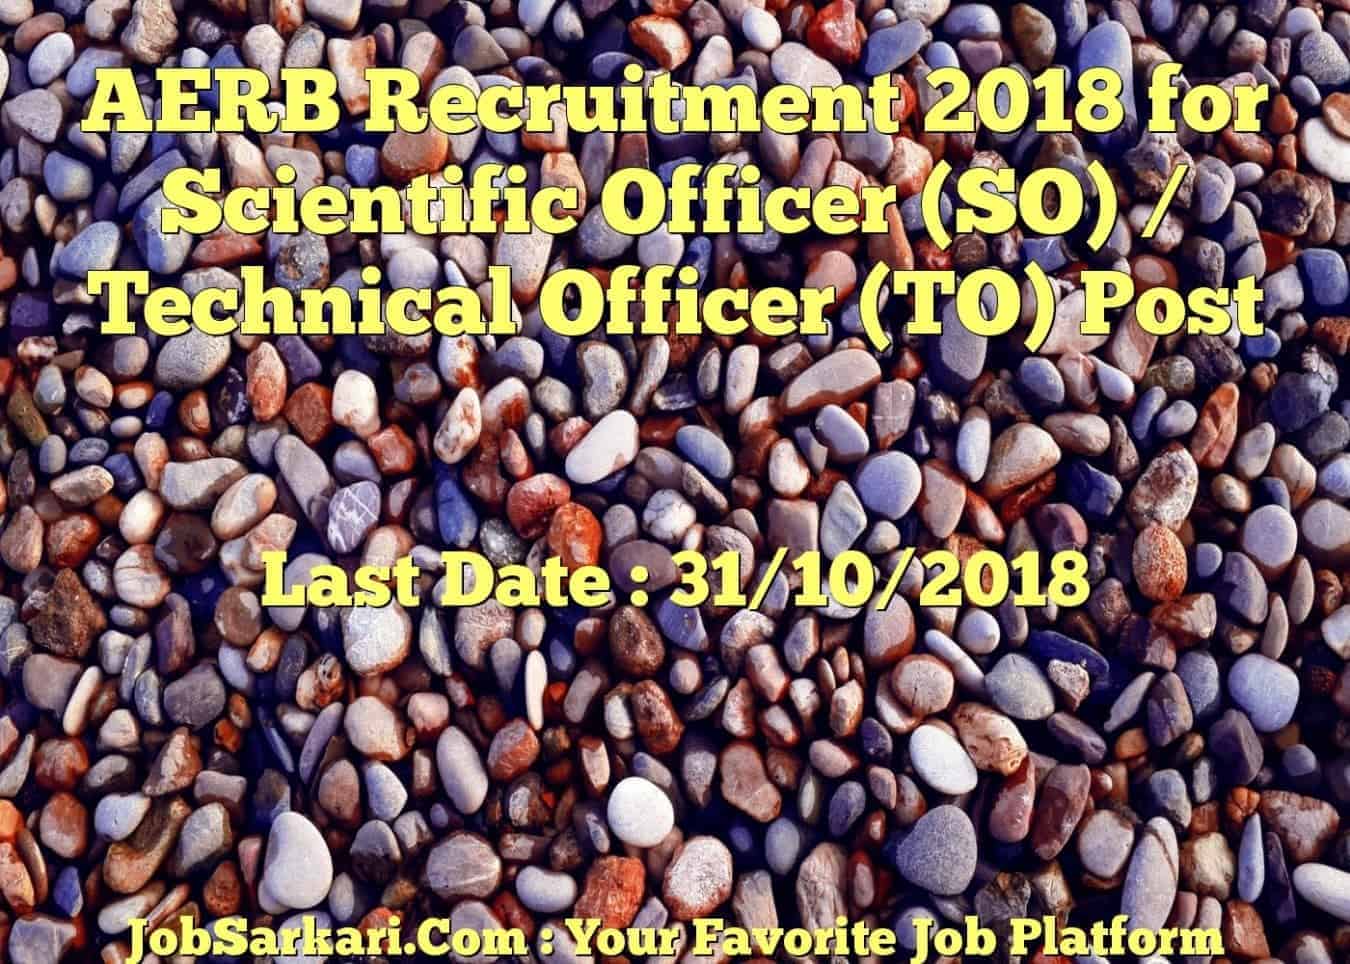 AERB Recruitment 2018 for Scientific Officer (SO) / Technical Officer (TO) Post